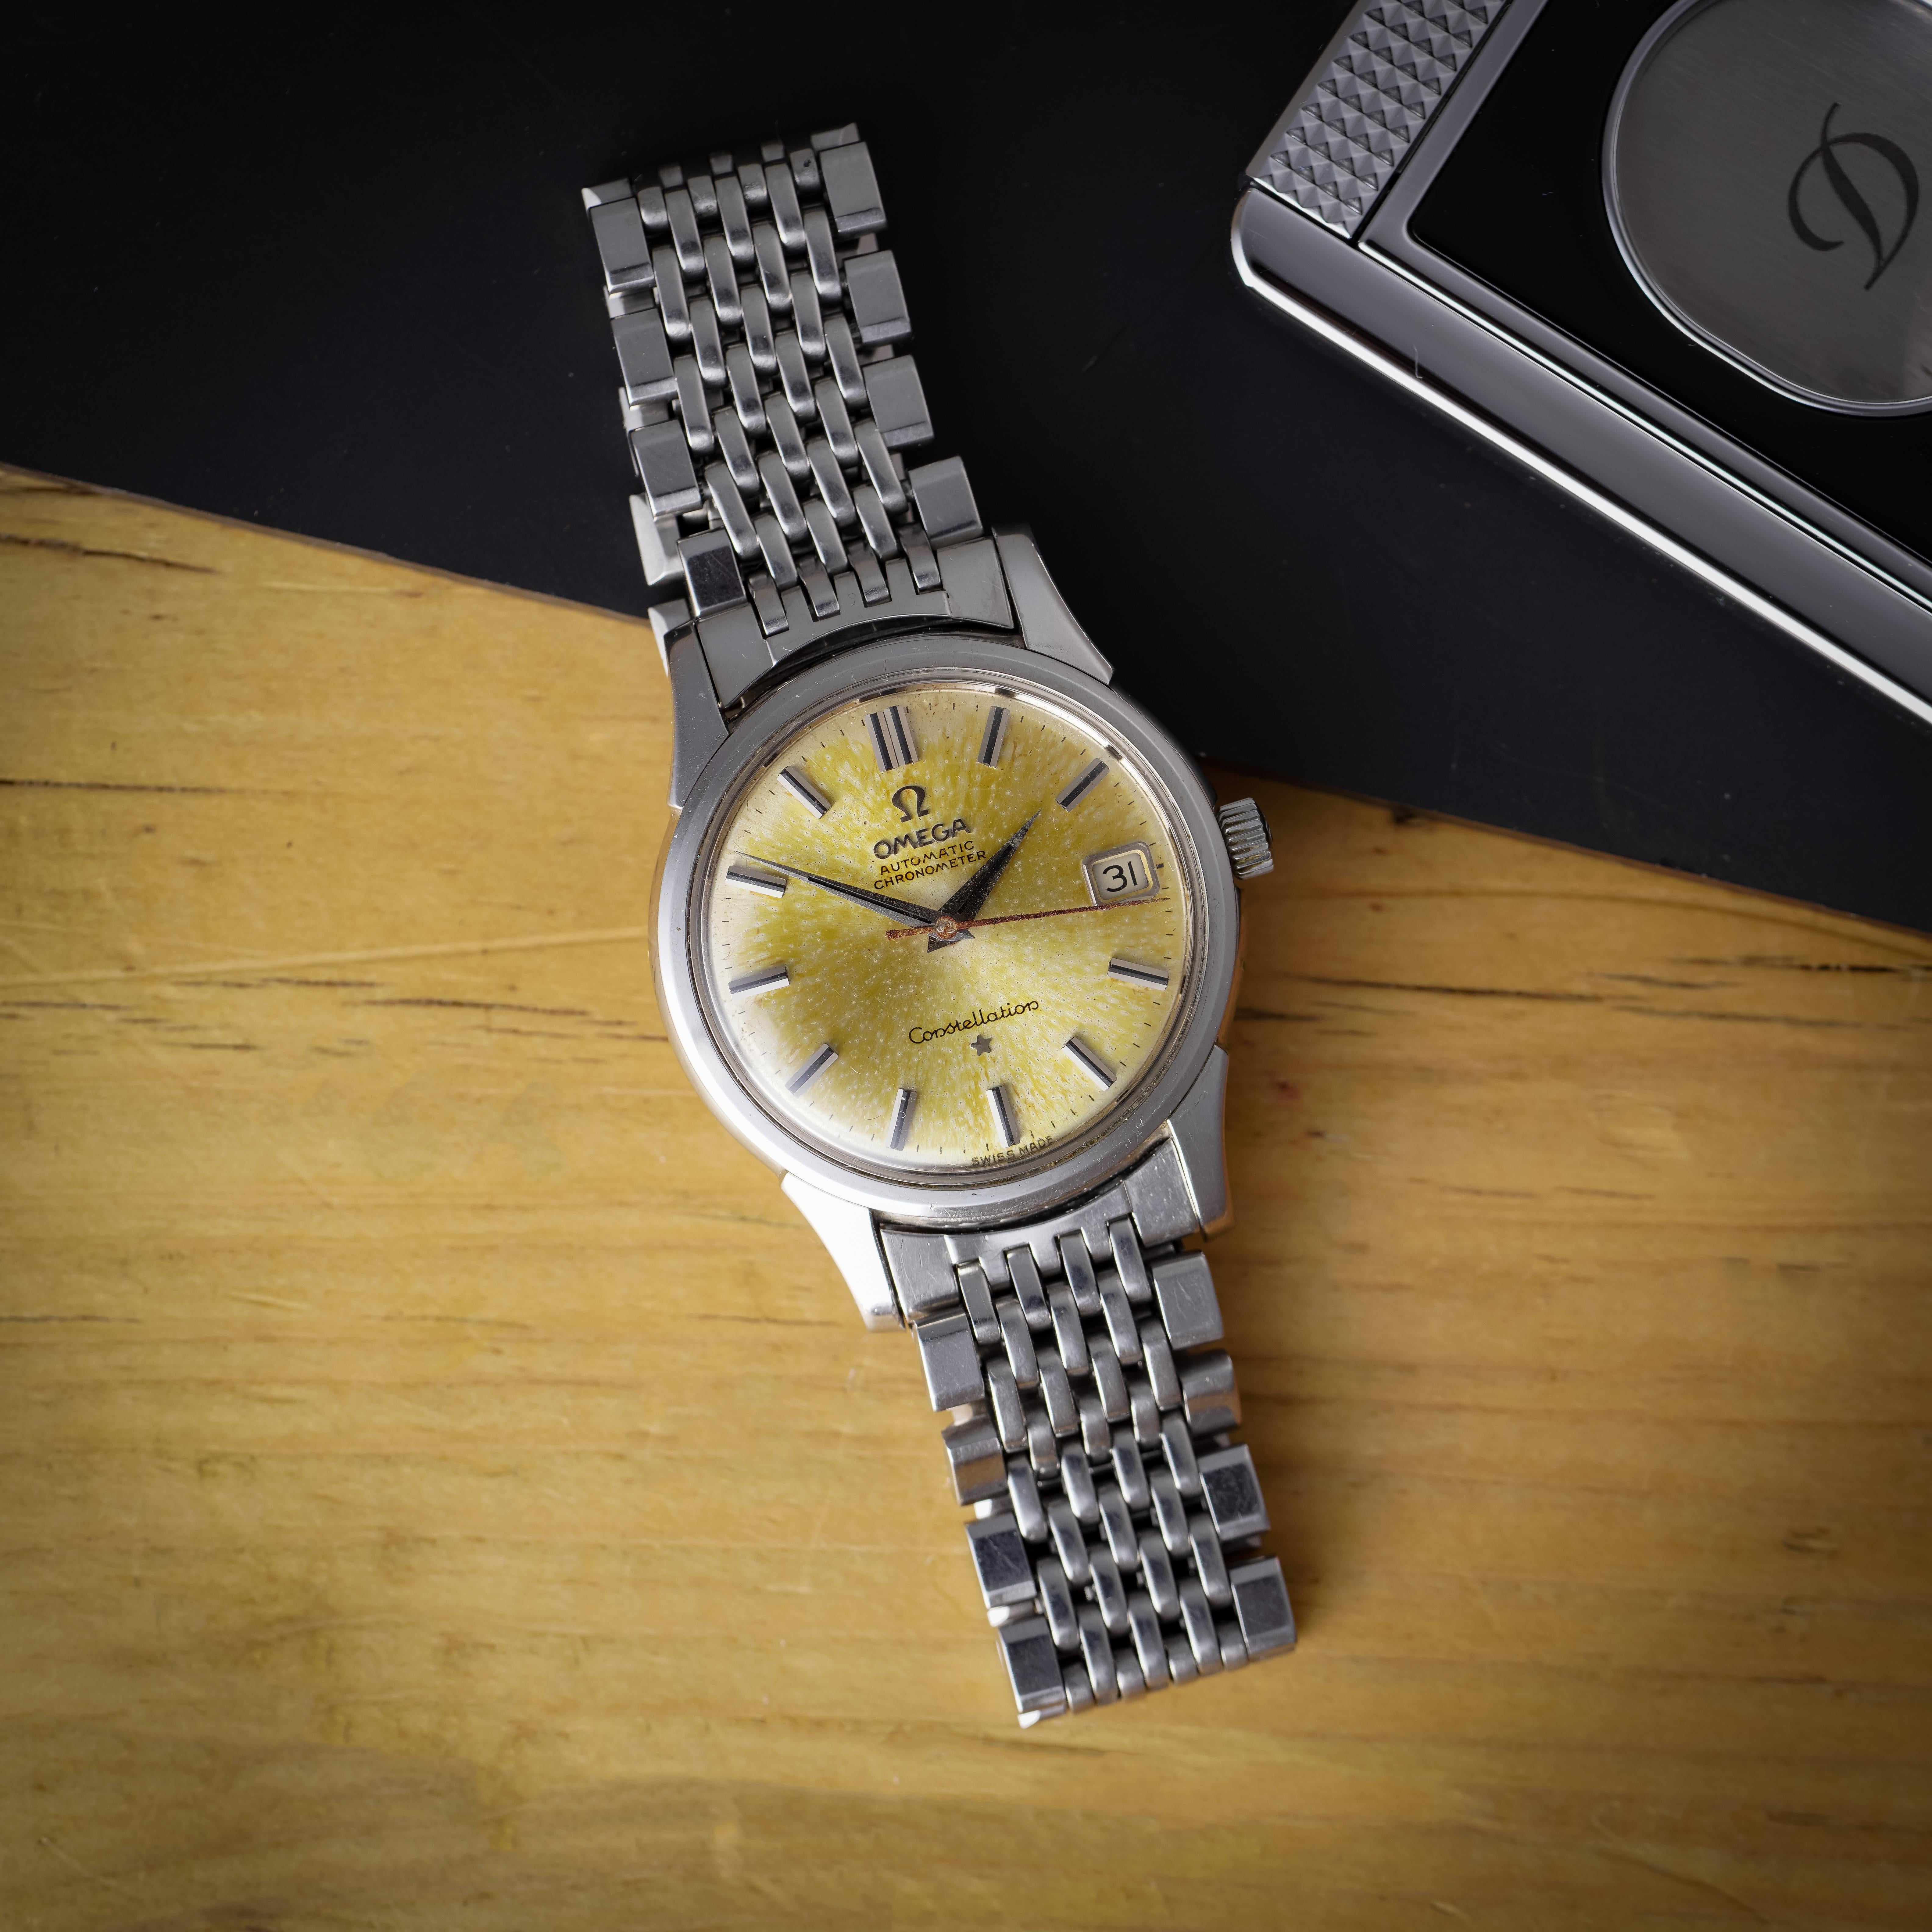 Omega Constellation Chronometer Automatic Vintage Stainless Steel Watch.
Circa 1960's

* Please note: customs and import charges may apply for international buyers, bidders are responsible for any customs duties fees.

Made in Switzerland, Circa